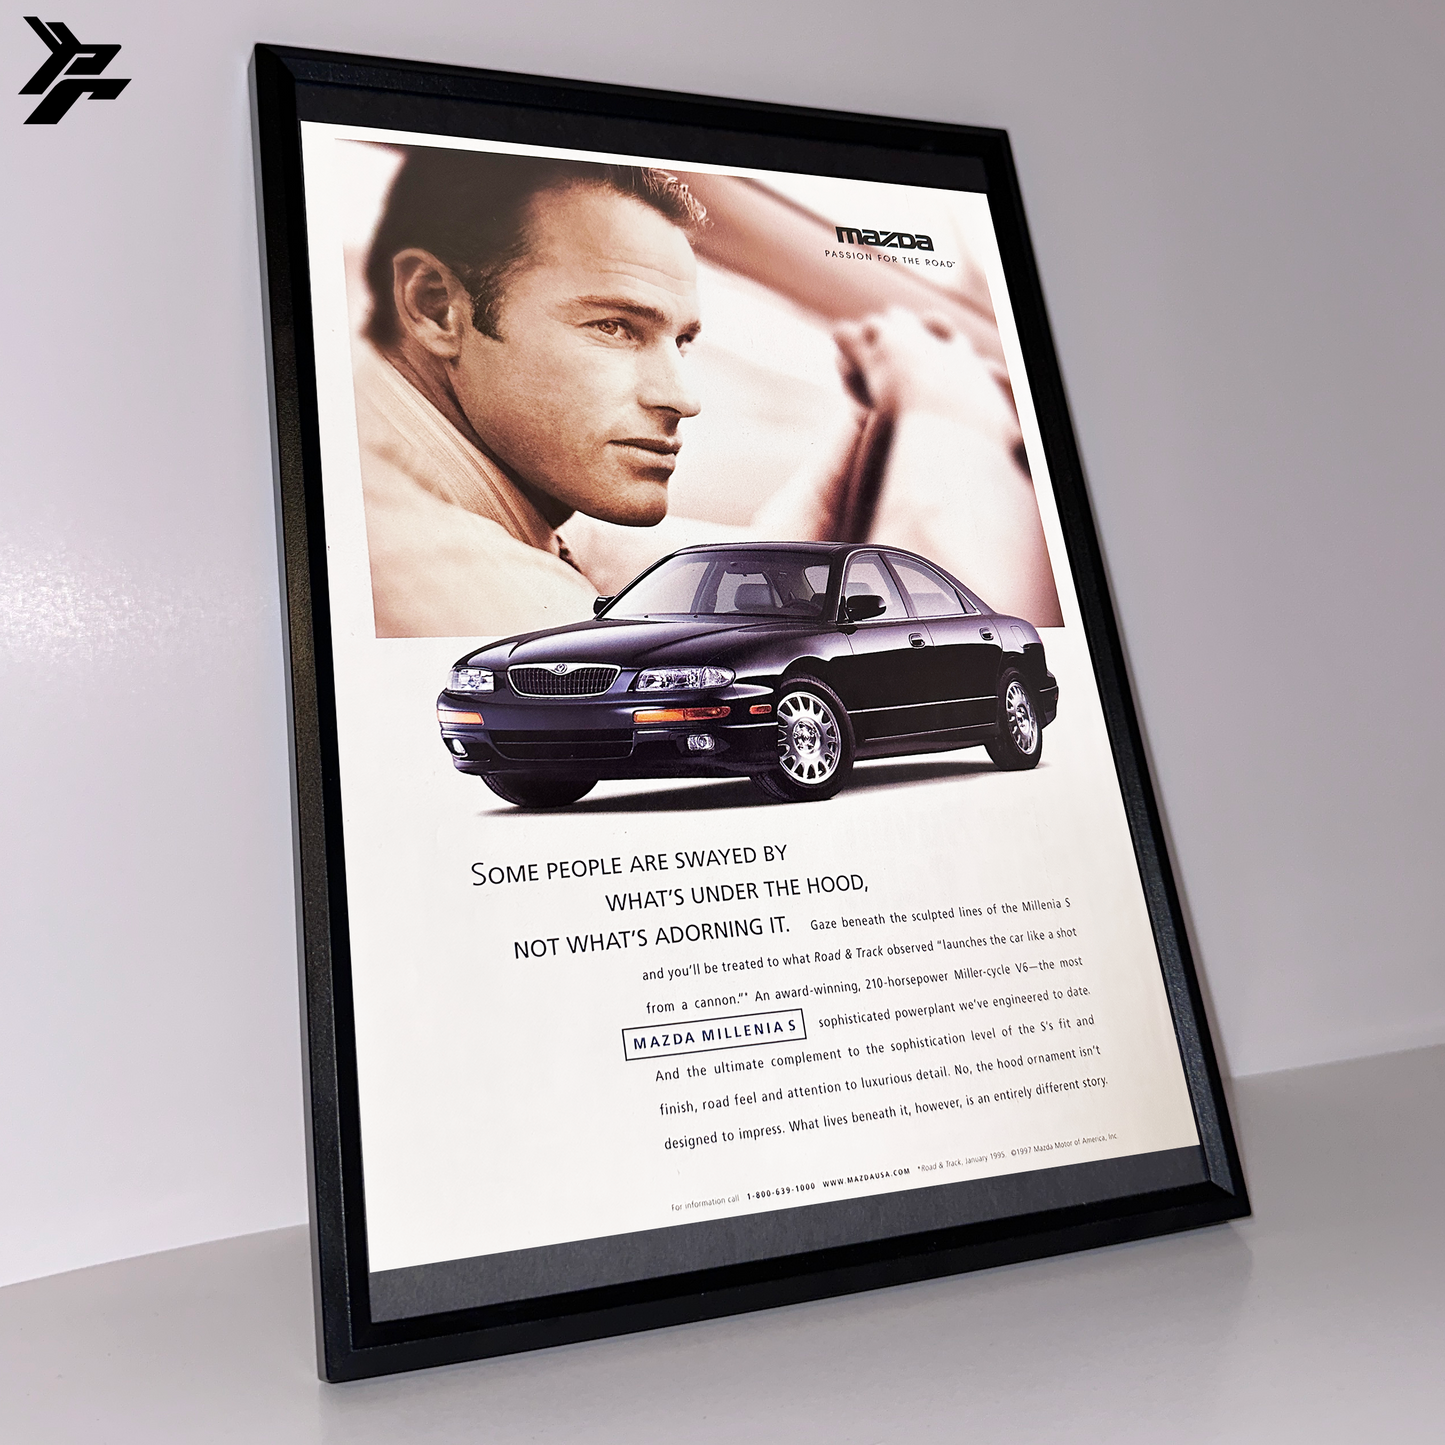 Mazda some people are swayed by framed ad